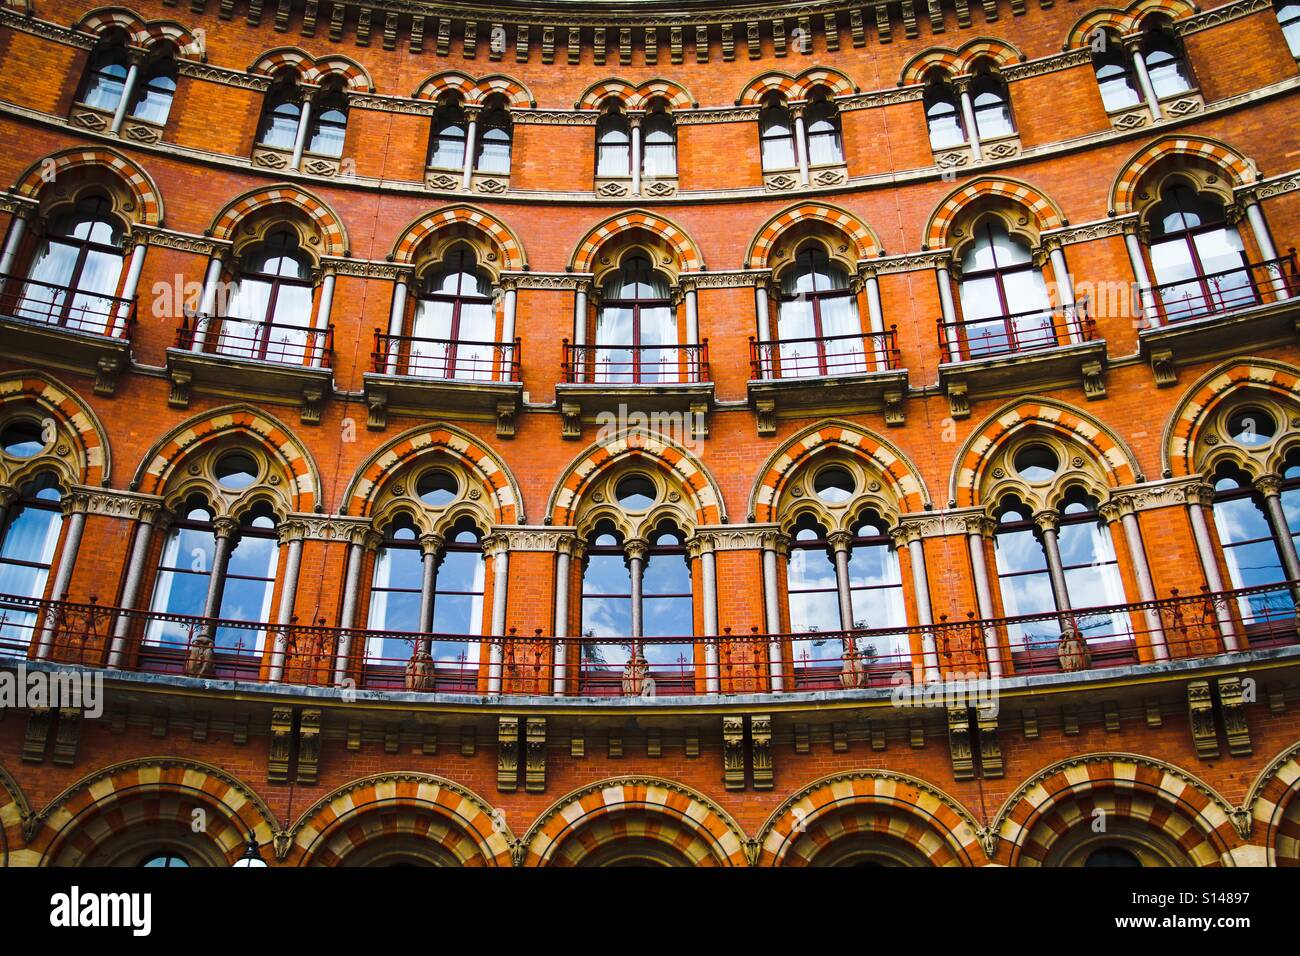 The curved facade of an ornate, Gothic building with rows of uniform, arched windows and elaborate, red brick architecture. Stock Photo